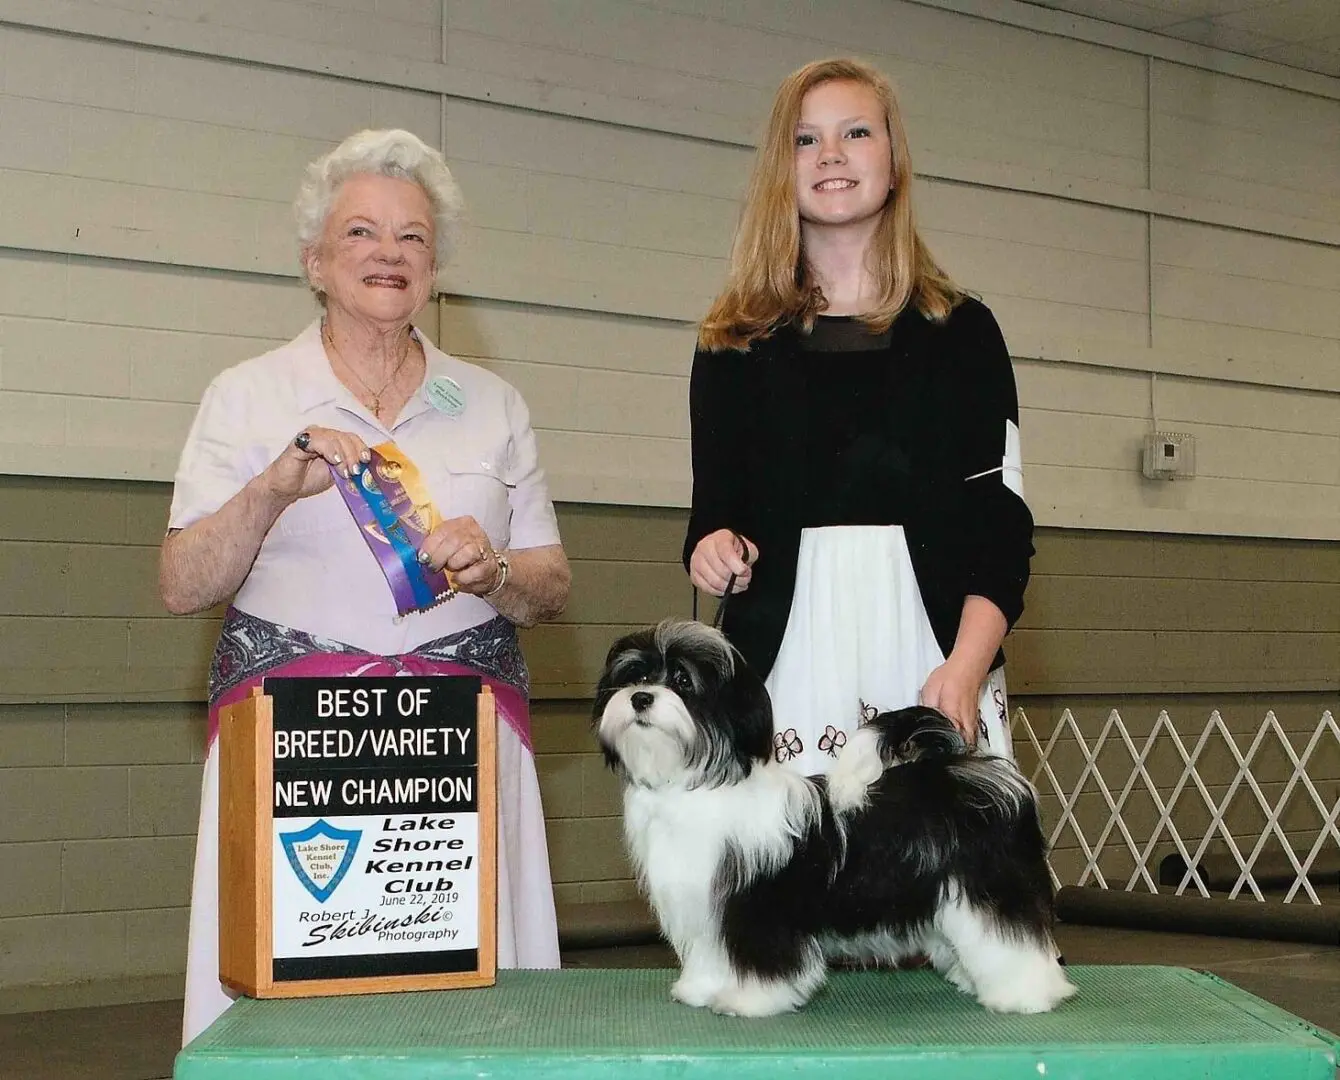 At a dog show in Chicago, a woman proudly stands next to her Havanese show dog.